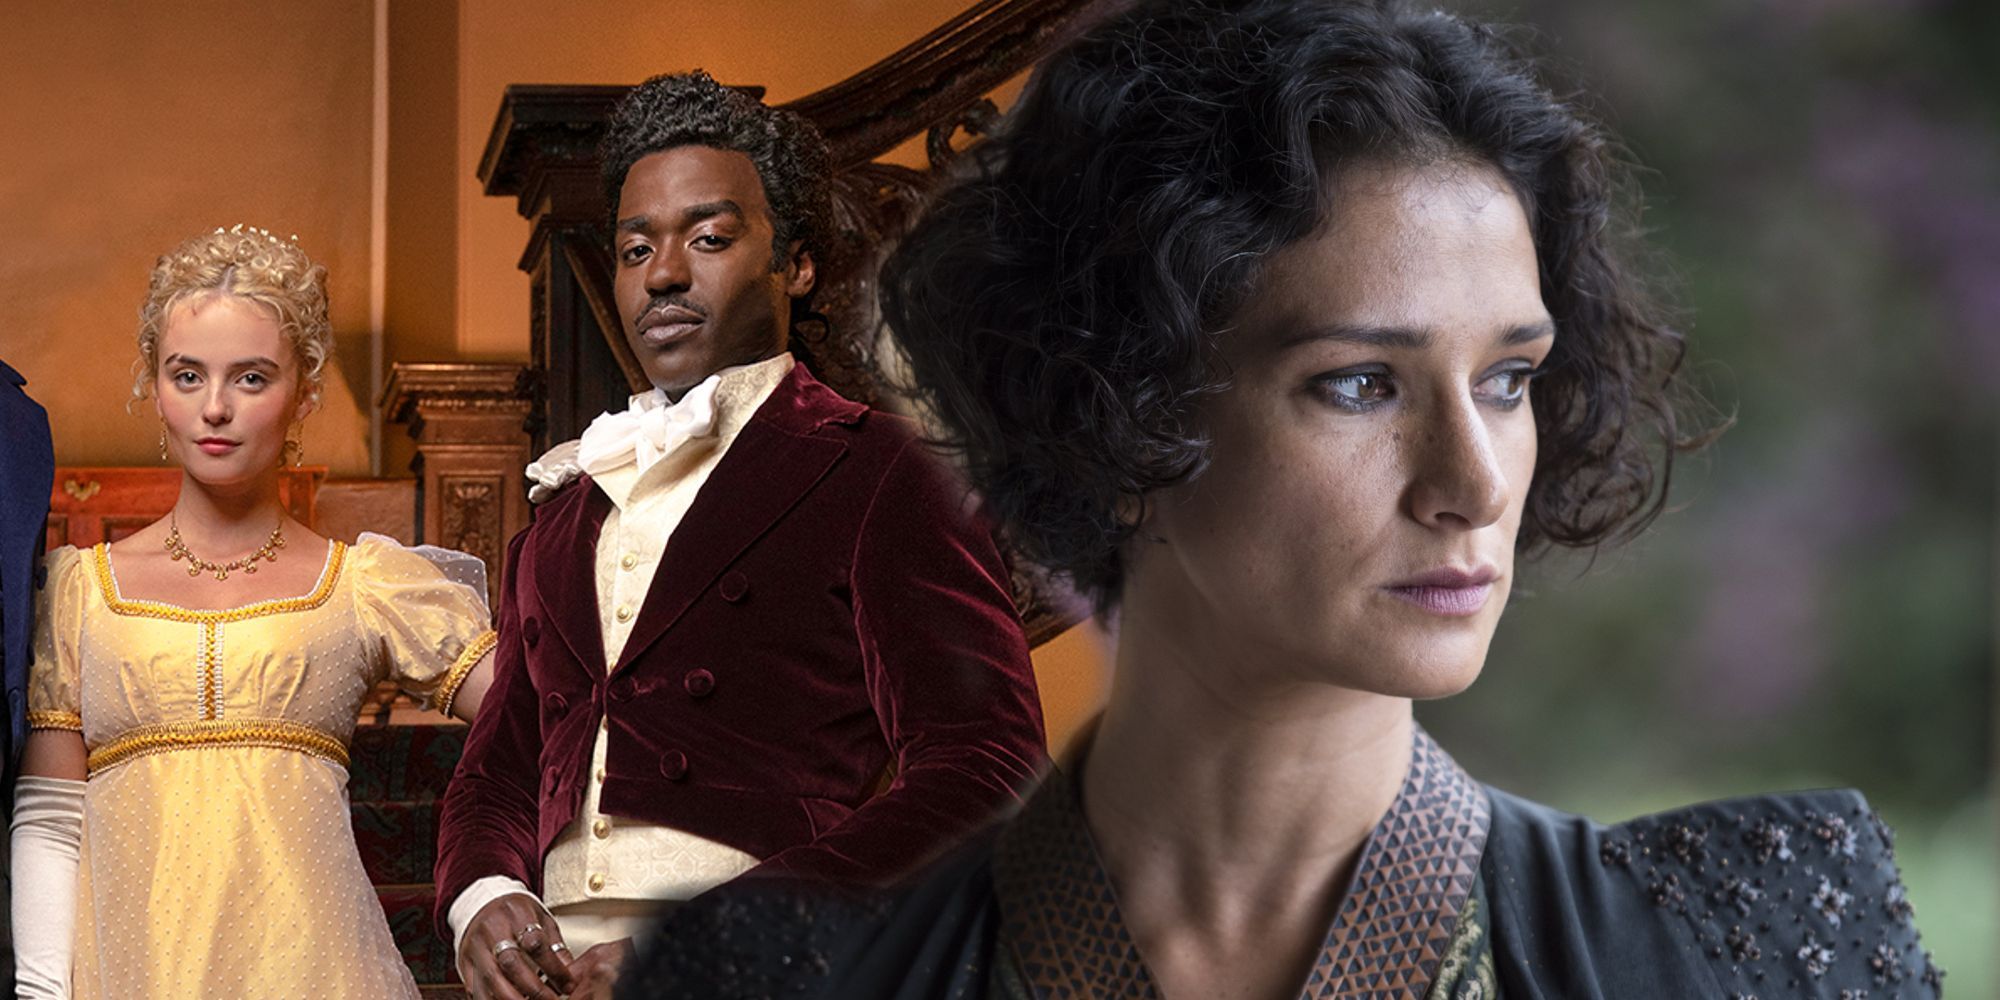 Blended image of Ncuti Gatwa and his companion in Doctor Who and Ellaria Sand looking to the side in Game of Thrones